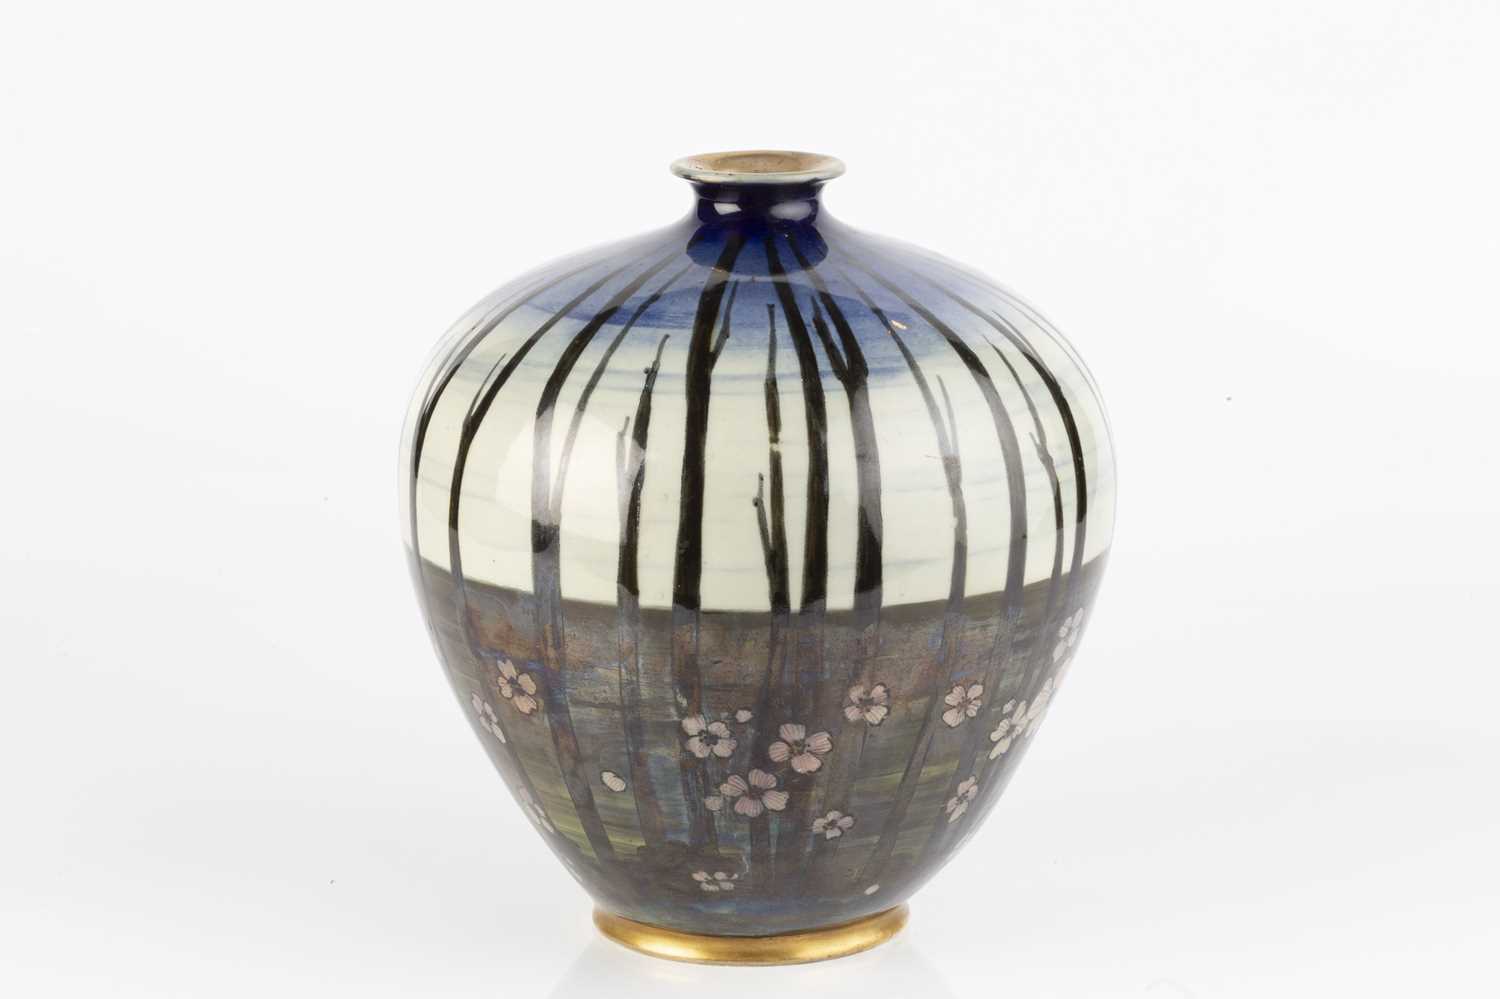 Attributed to Riessner, Stellmacher & Kessel Art Nouveau vase painted with a maiden in a forest - Image 2 of 4